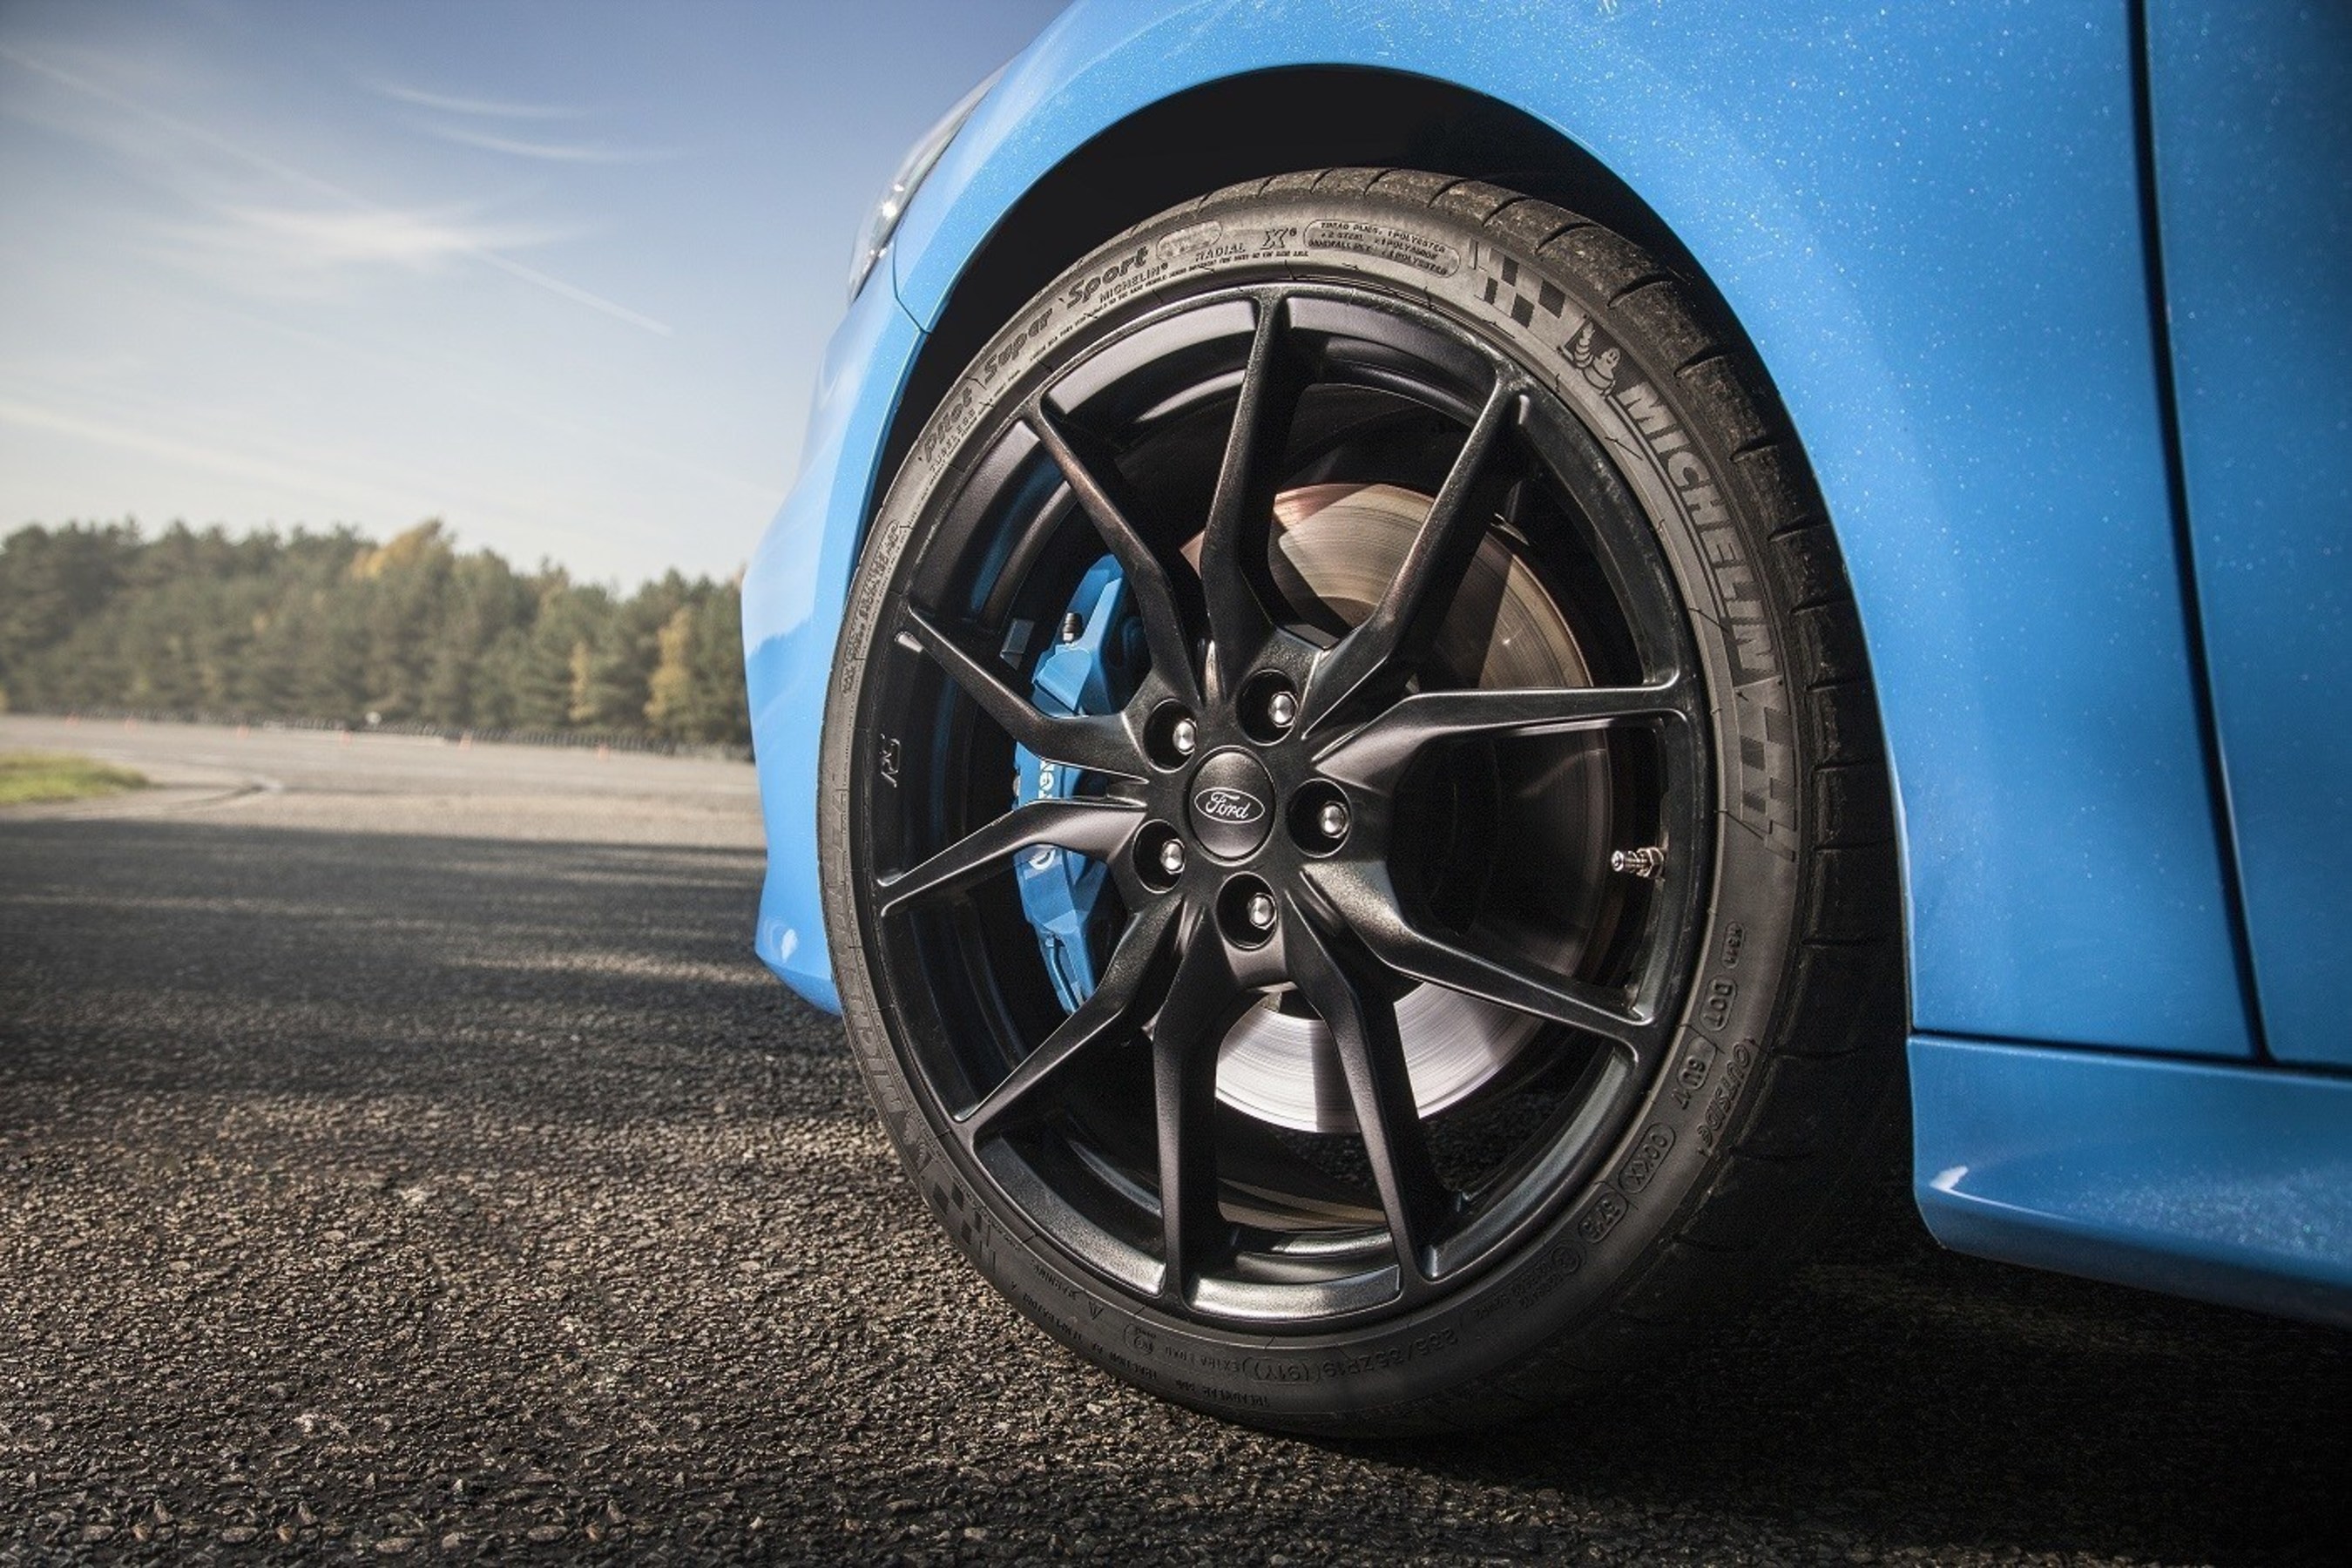 FORD FOCUS RS OFFERS A FULL SUITE OF MICHELIN PERFORMANCE TIRE OPTIONS